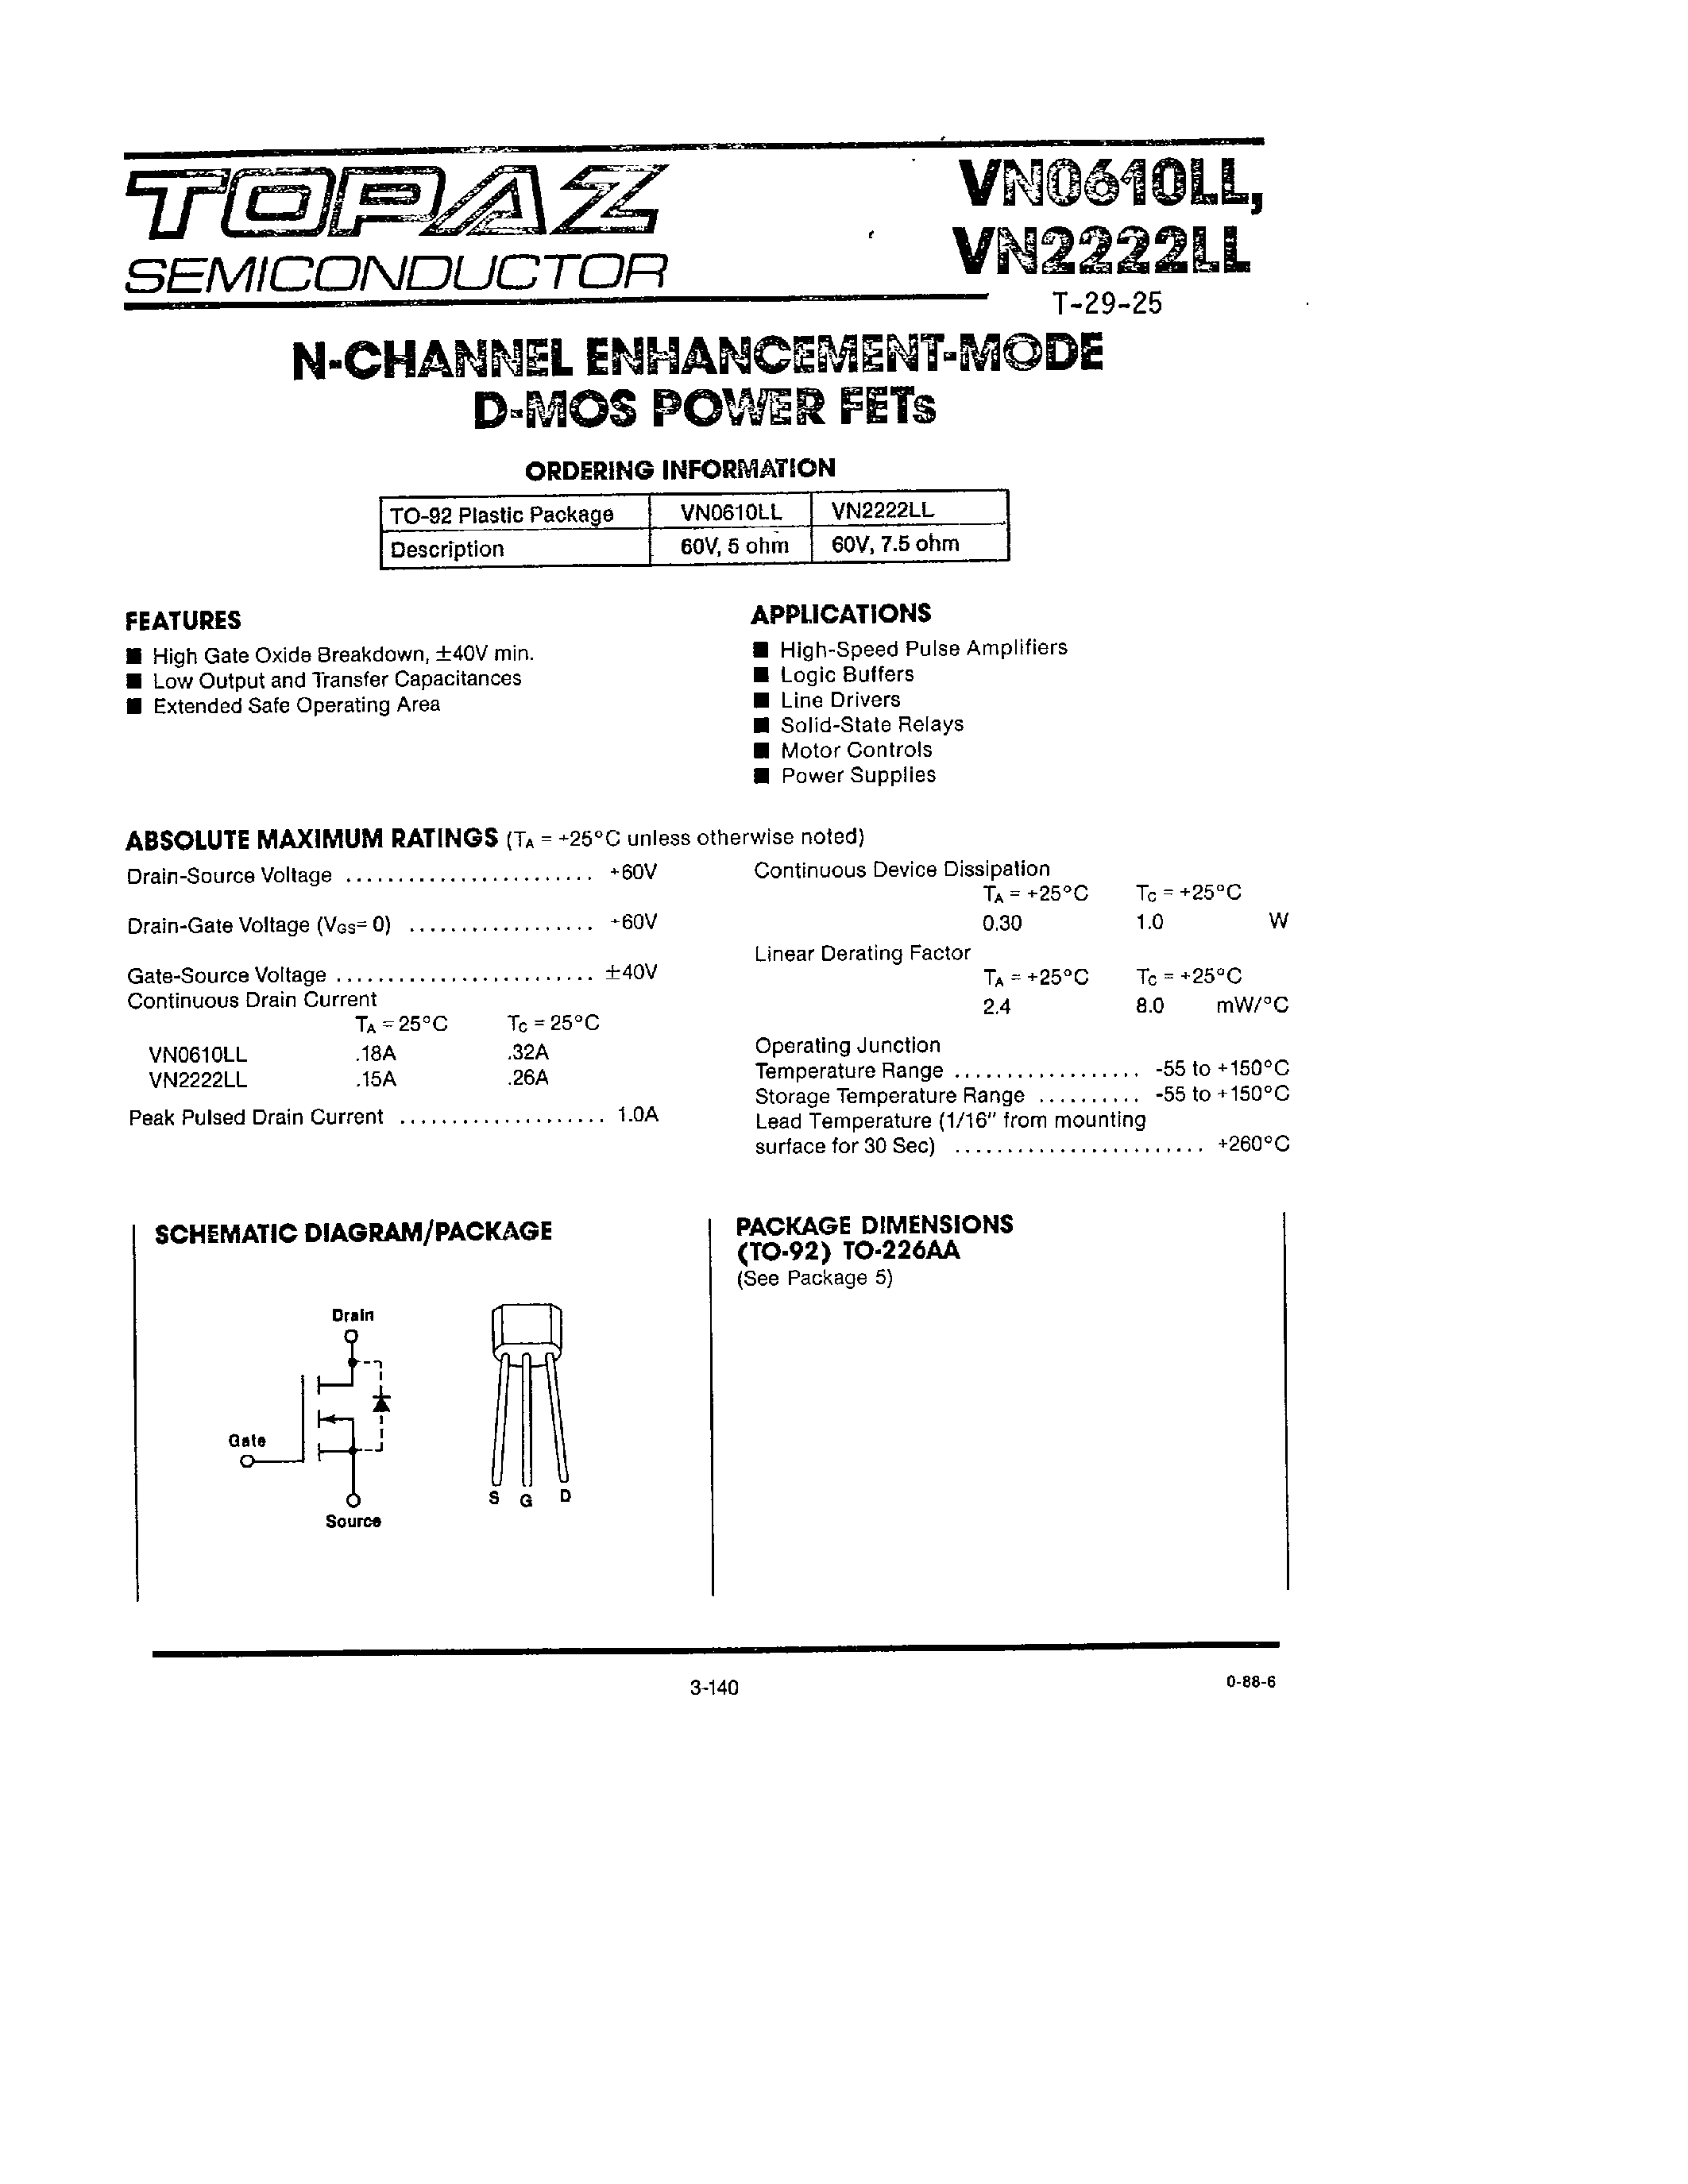 Datasheet VN2222LL - N CHANNEL ENHANCEMENT MODE D MOS POWER FETS page 1